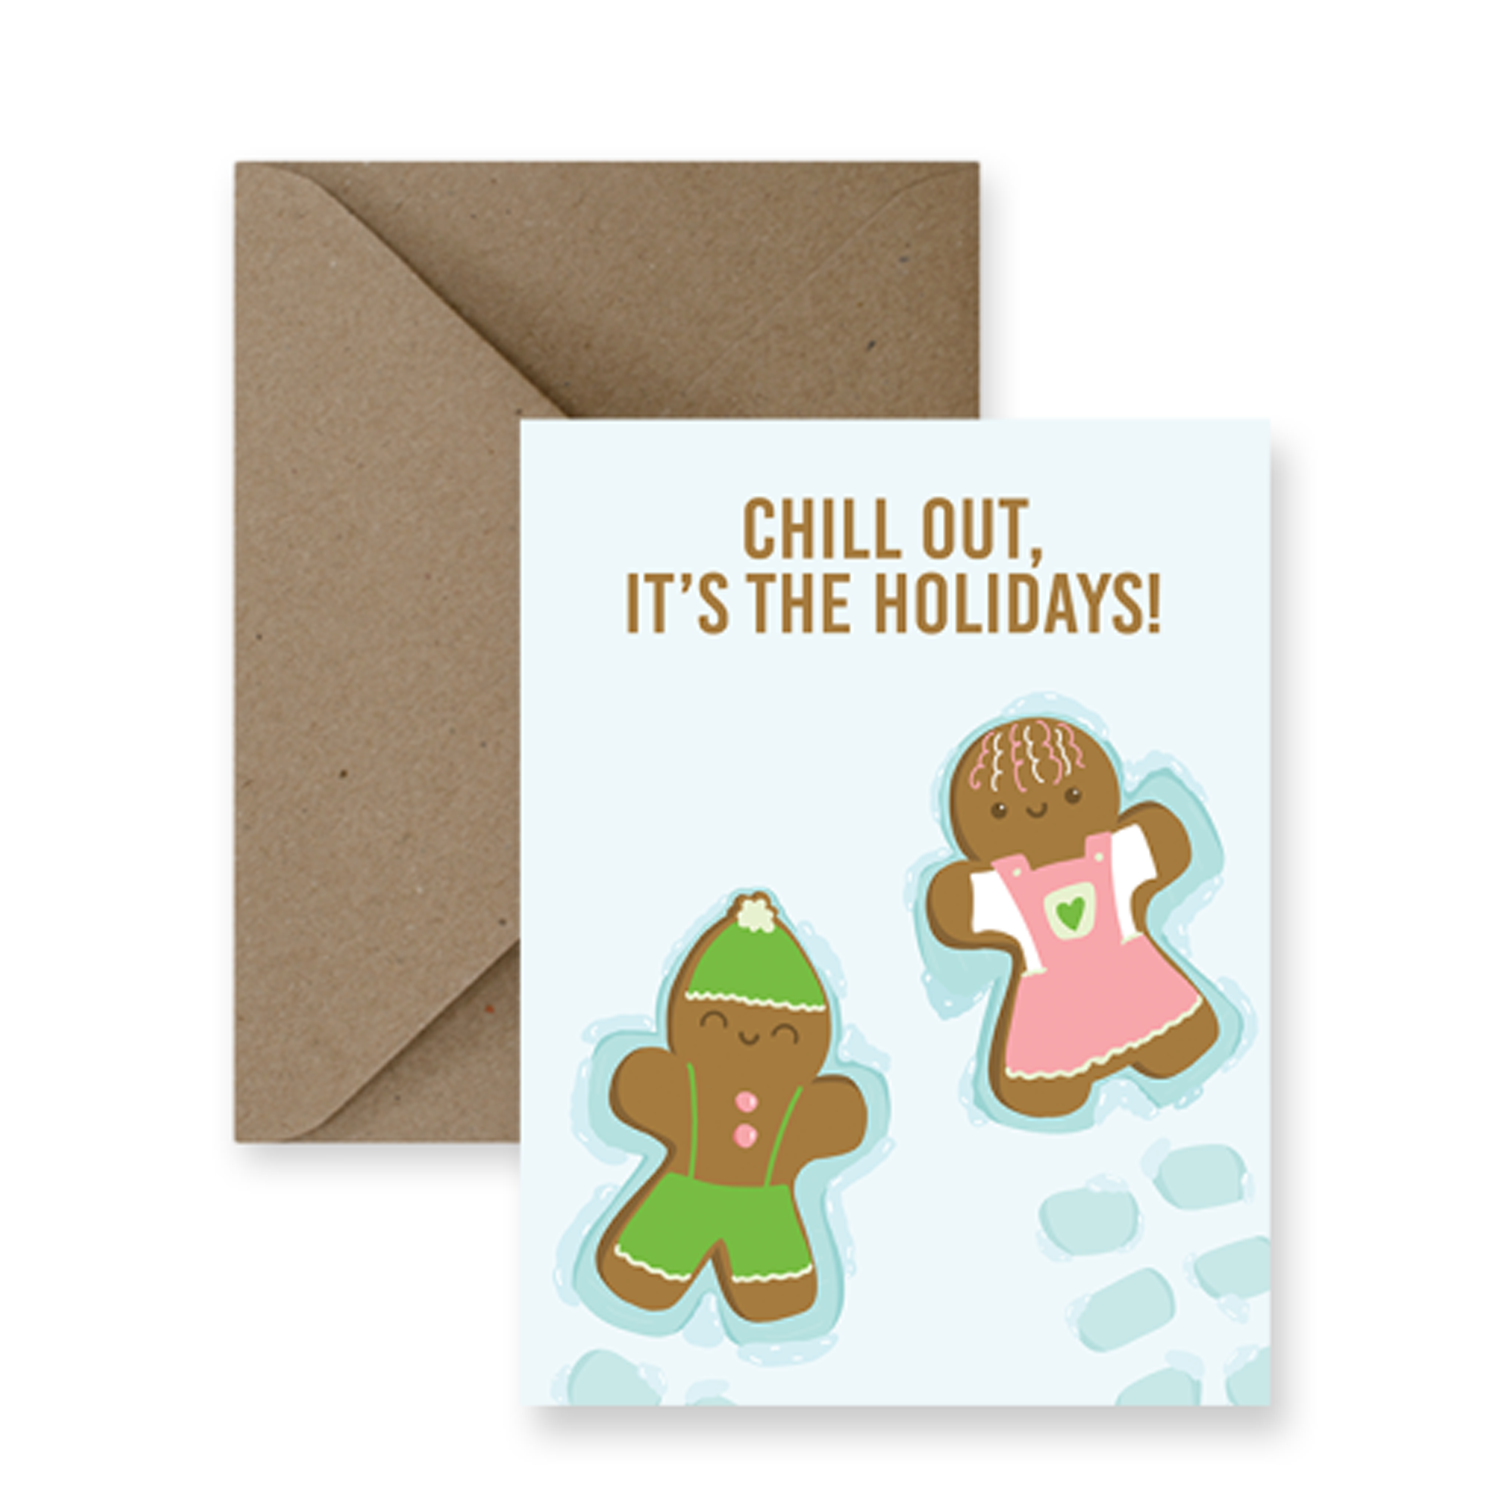 IMPAPER: Chill Gingerbread Card Product Image 1 of 4